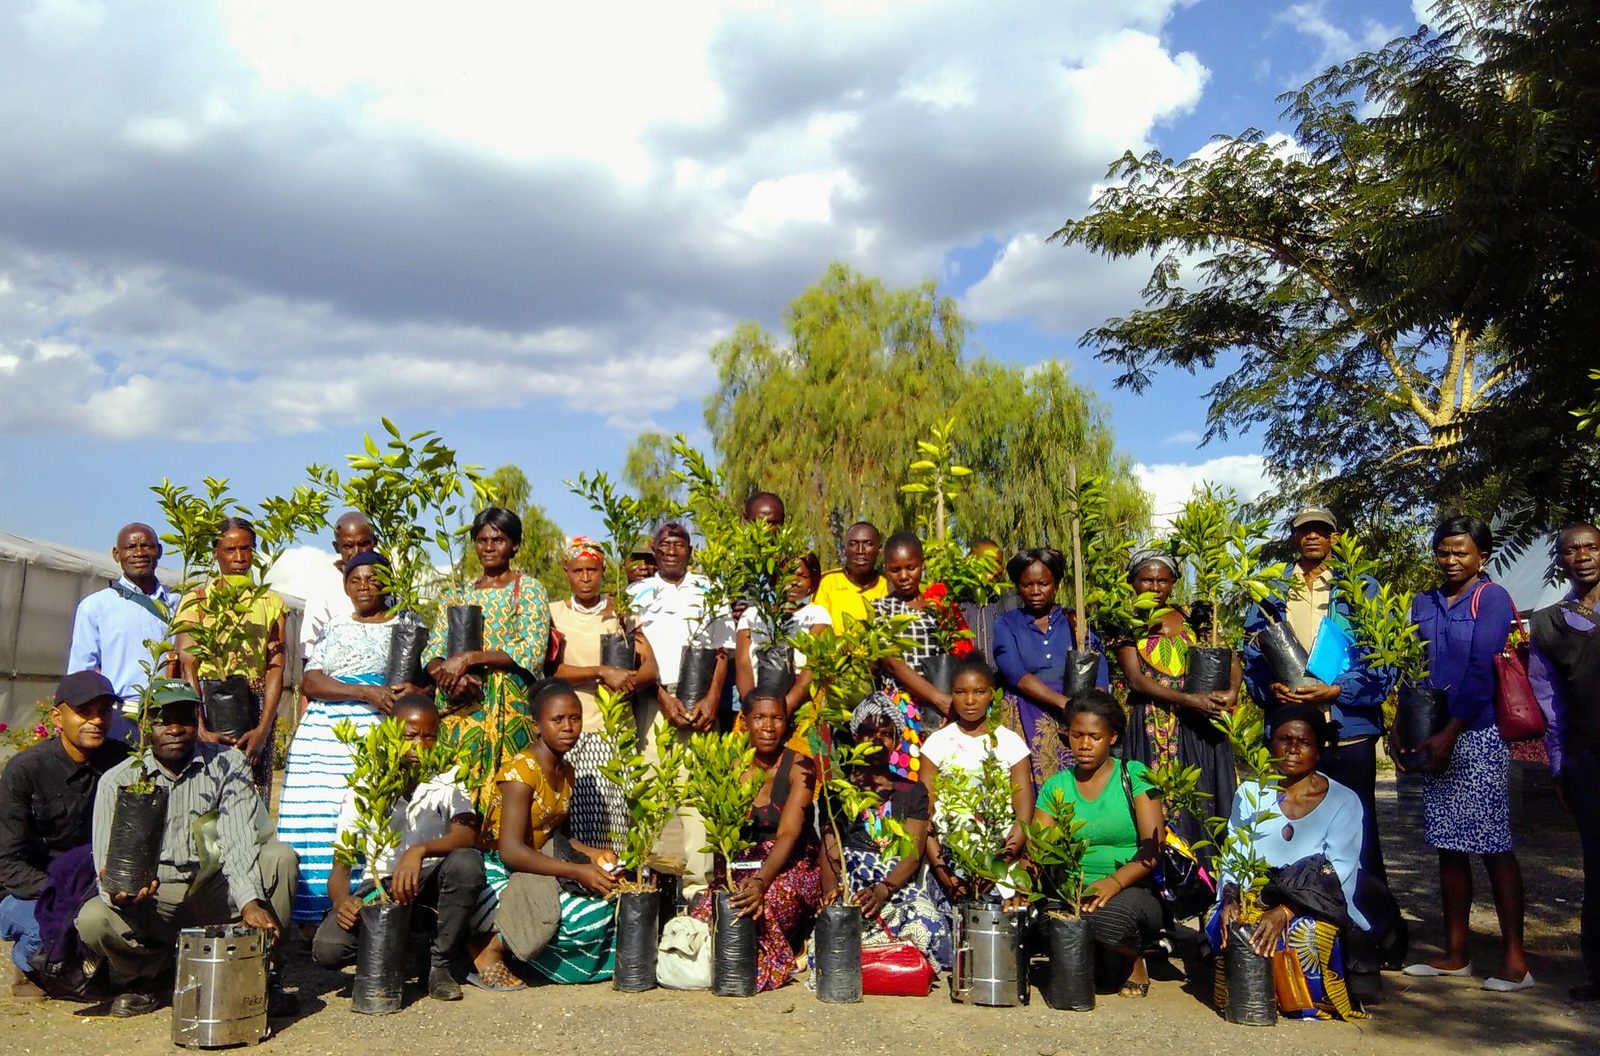 Workers on the project side in Zambia holding tree seedlings